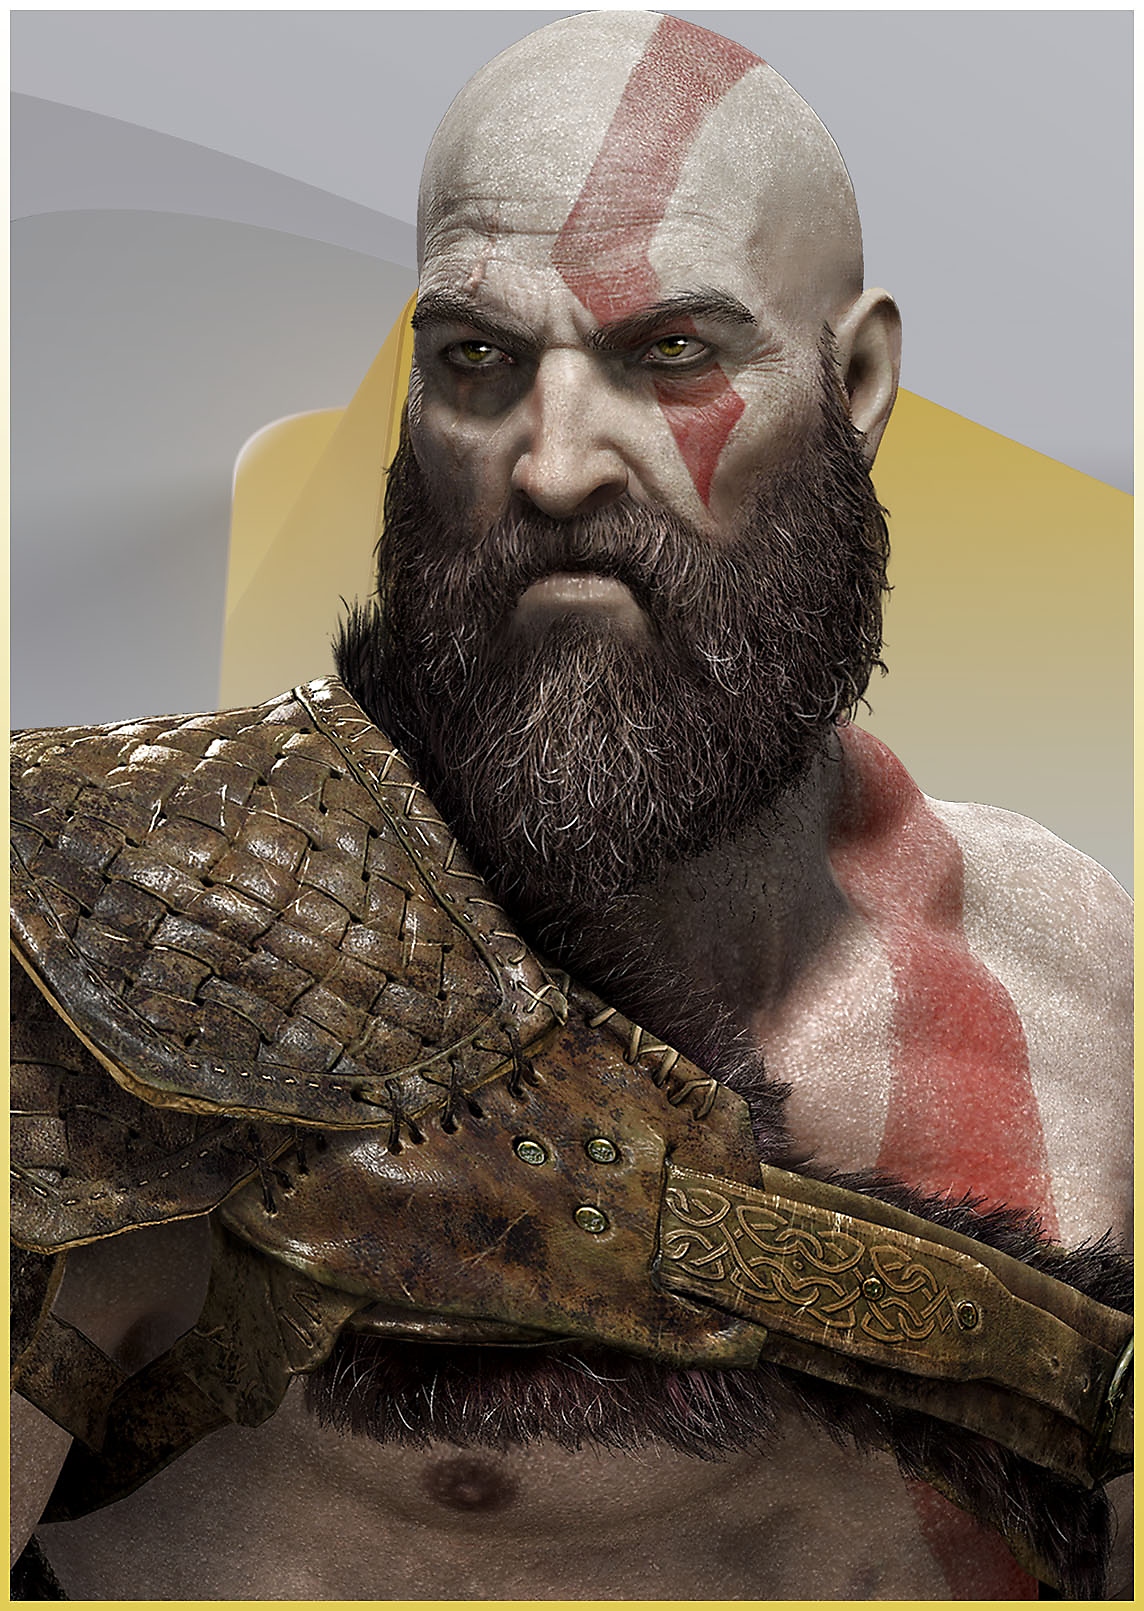 Kratos from God of War looking angry